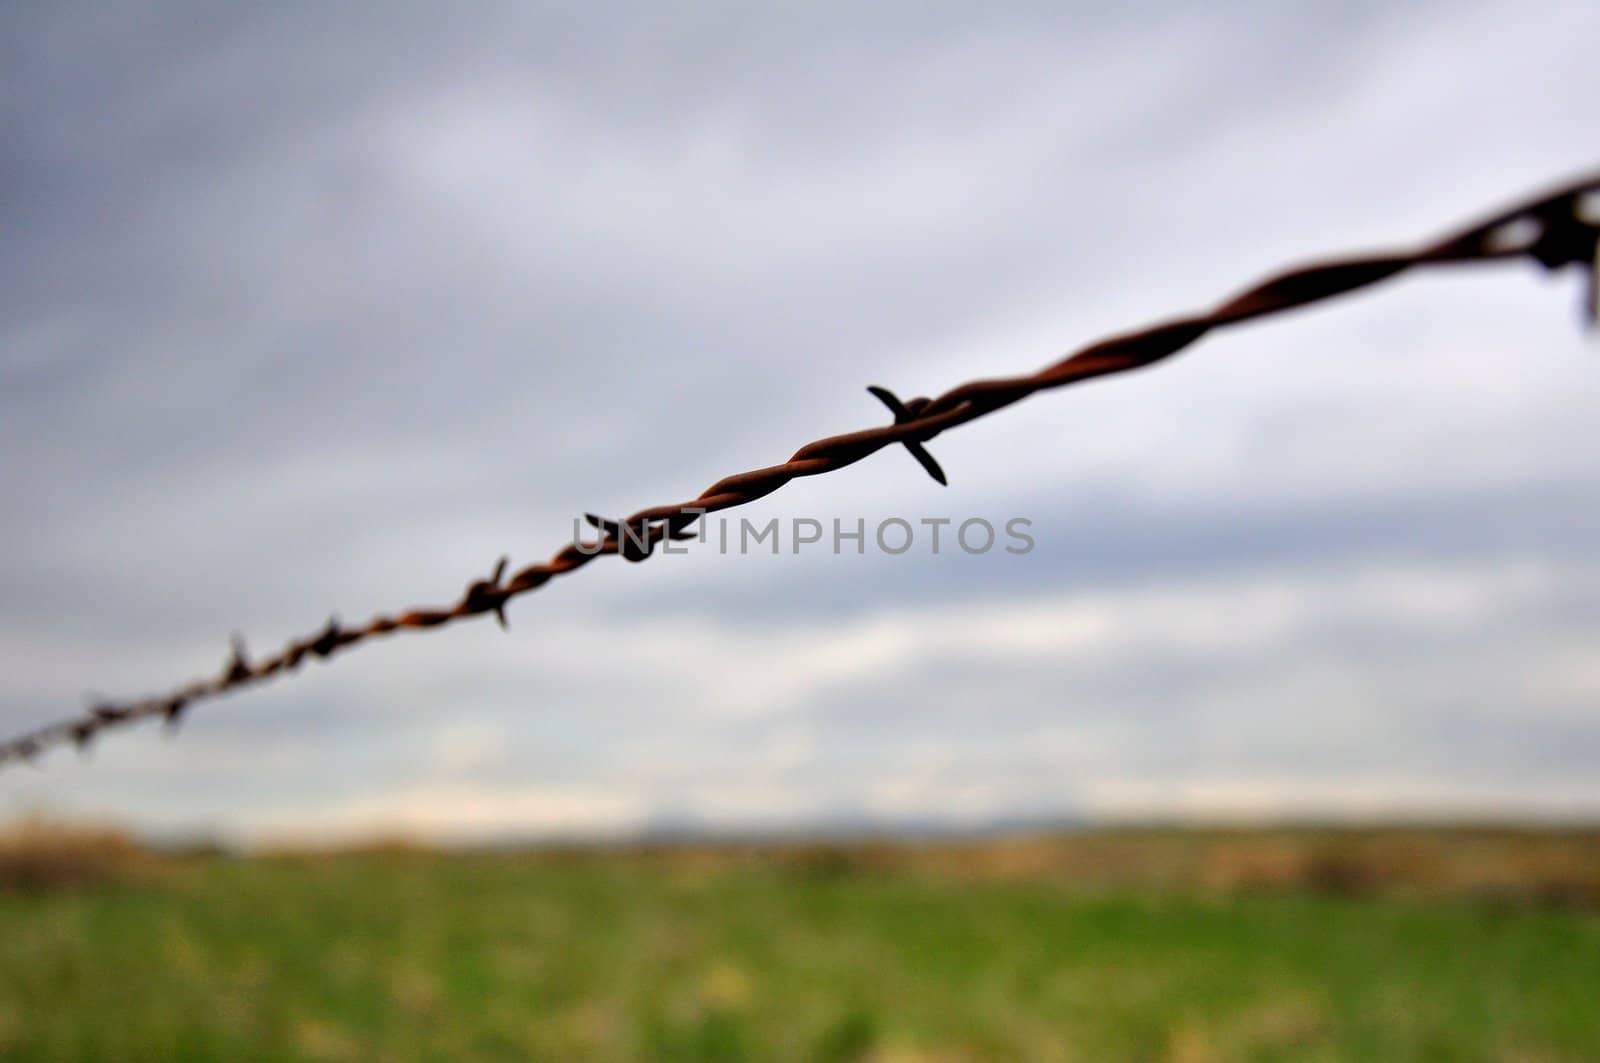 A barbed wire fence stretches out across the sky with a field in the distance.